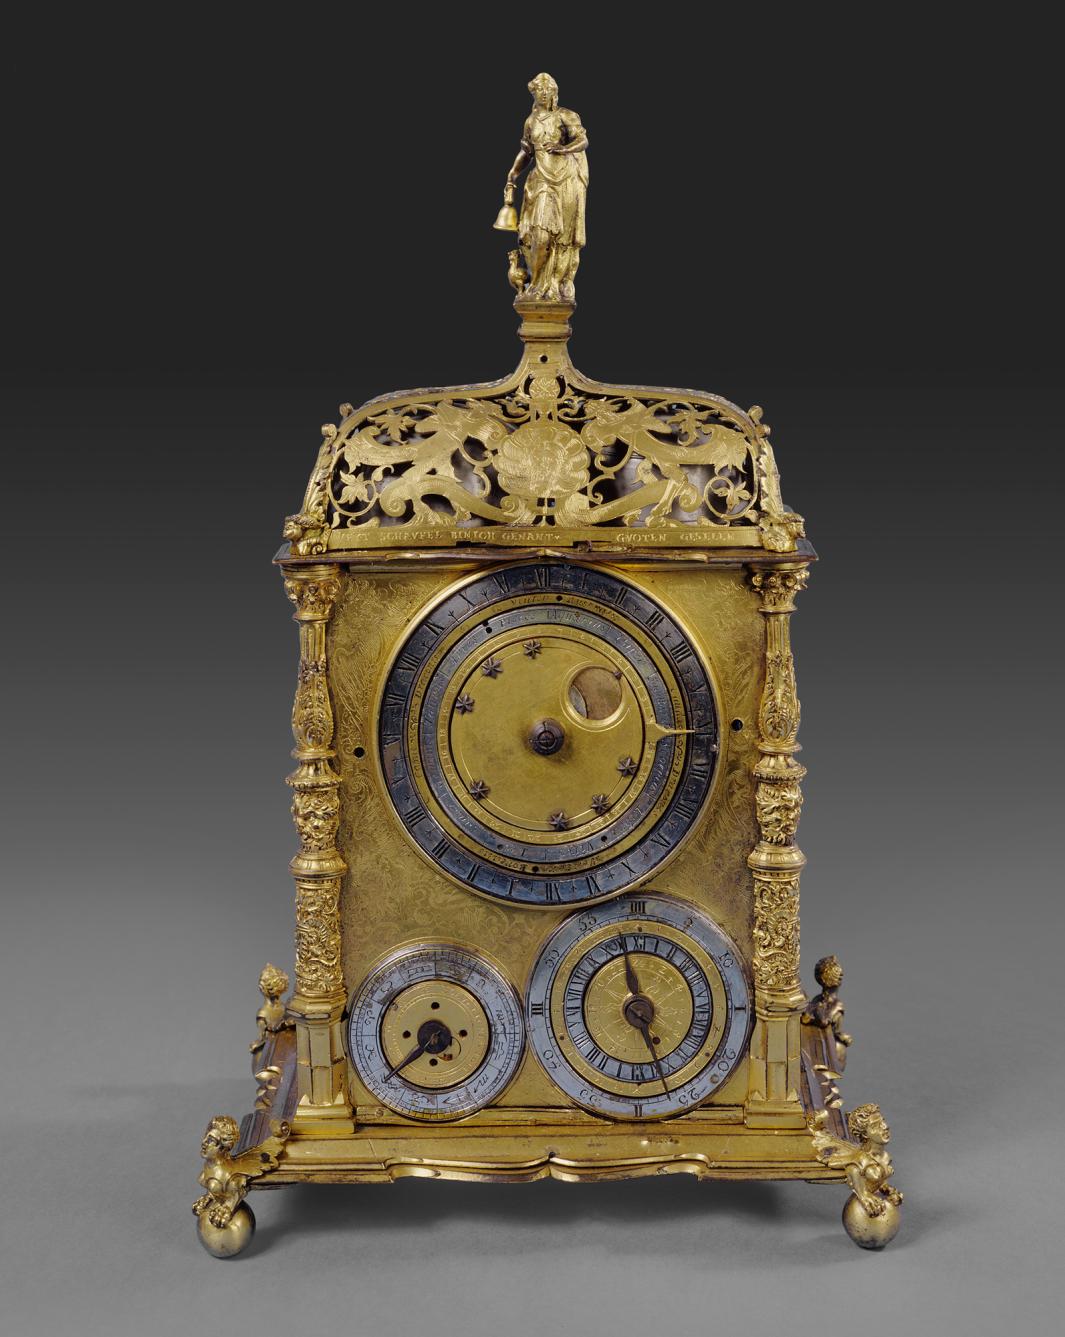 ornate gilt-brass table clock with astronomical and calendrical dials, with woman holding bell at top